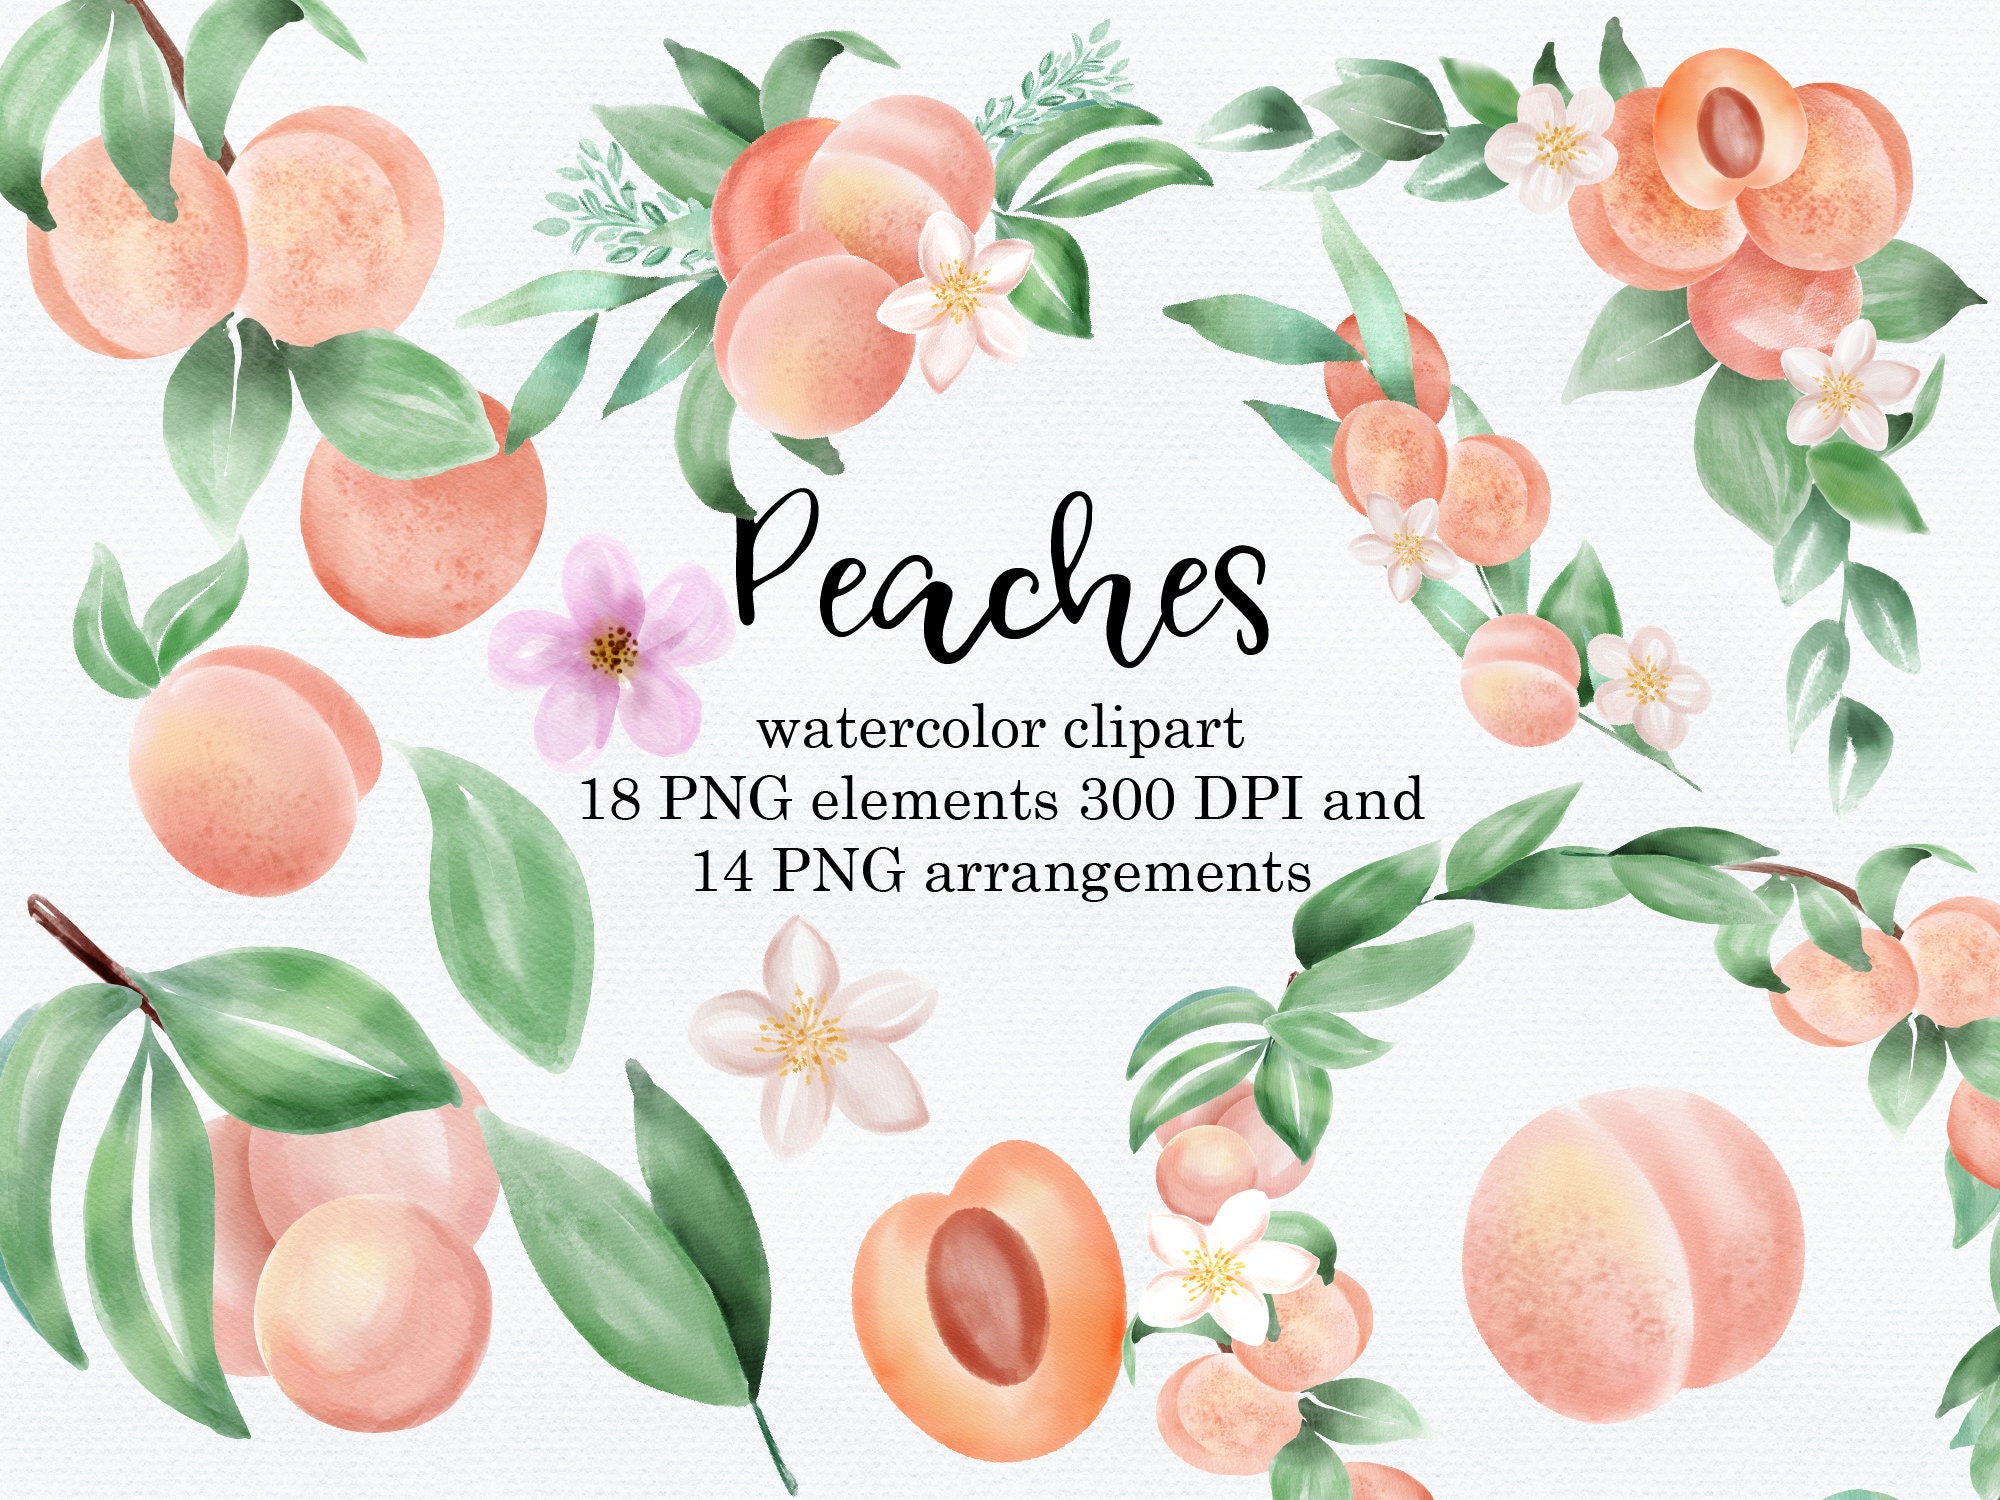 Peaches Watercolor Clipart Gold glitter frames with greenery | Etsy